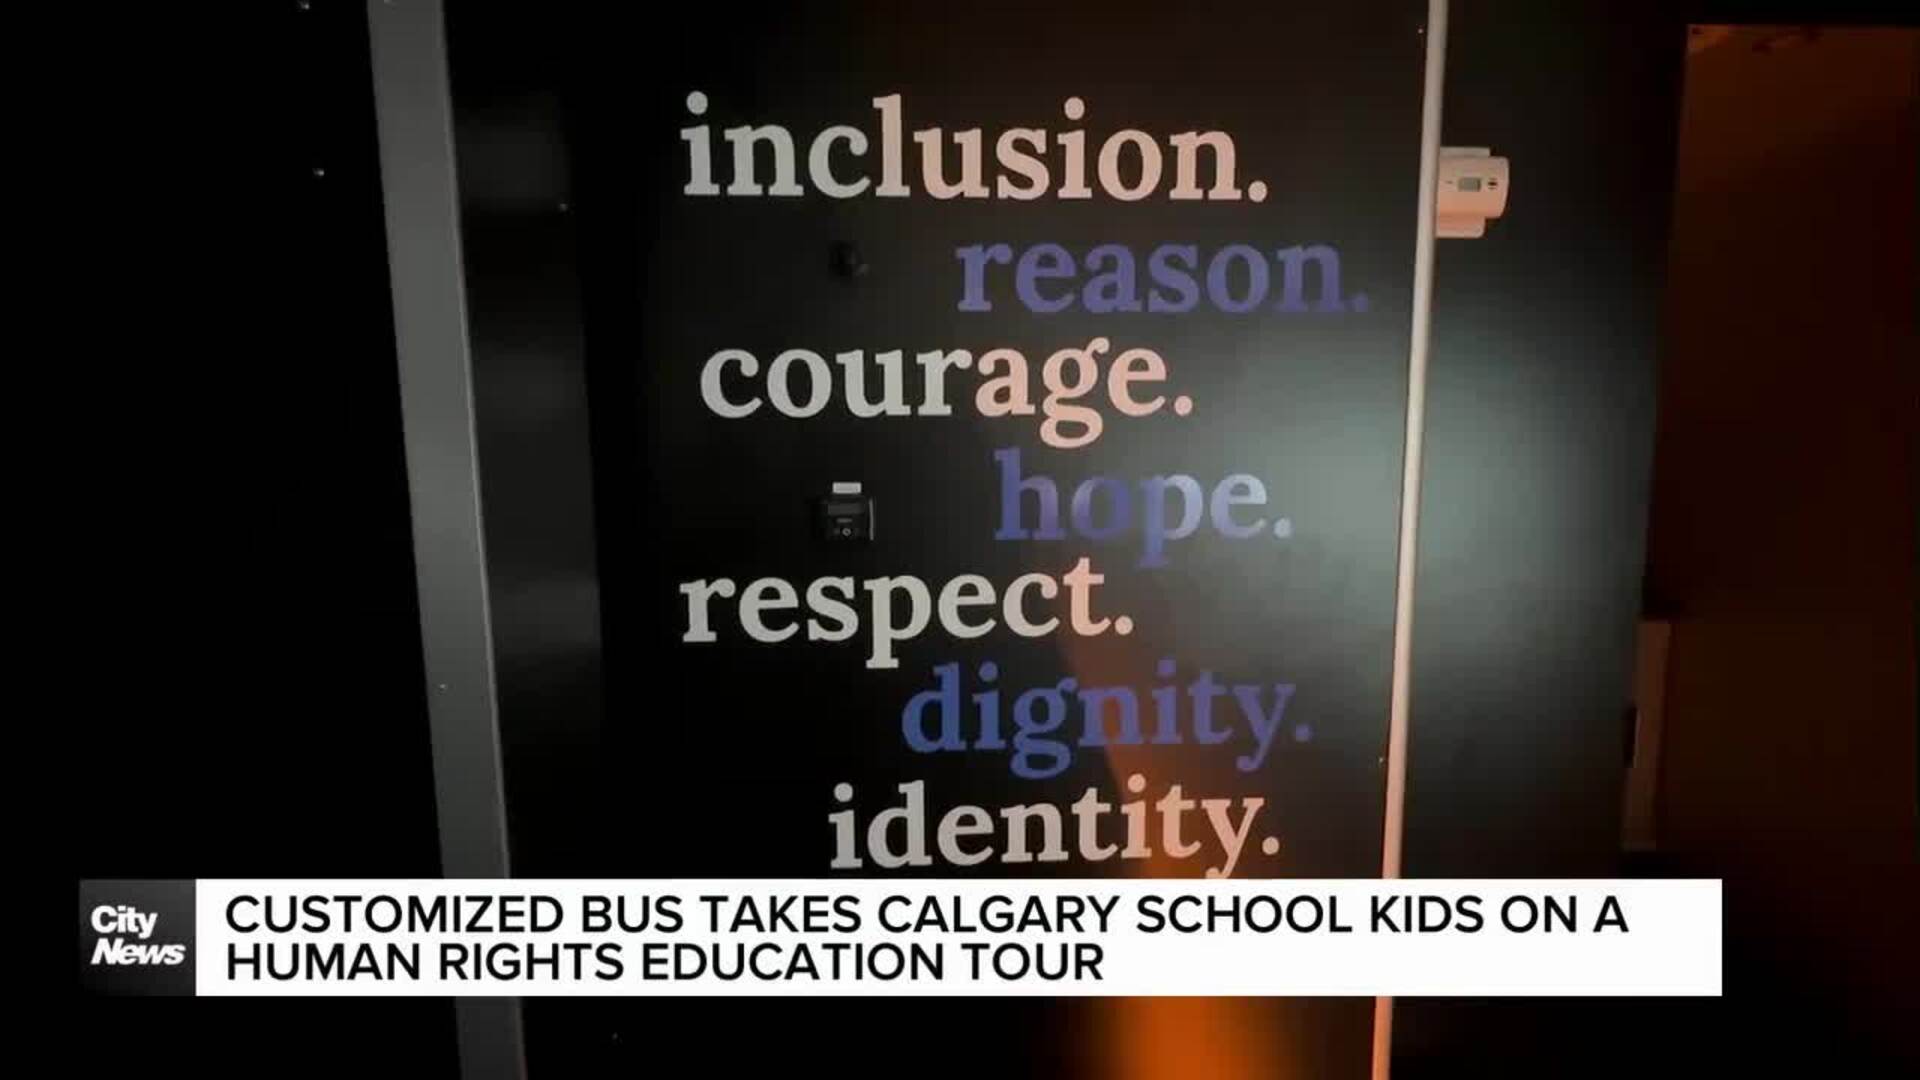 Customized bus takes Calgary school kids on a human rights education tour